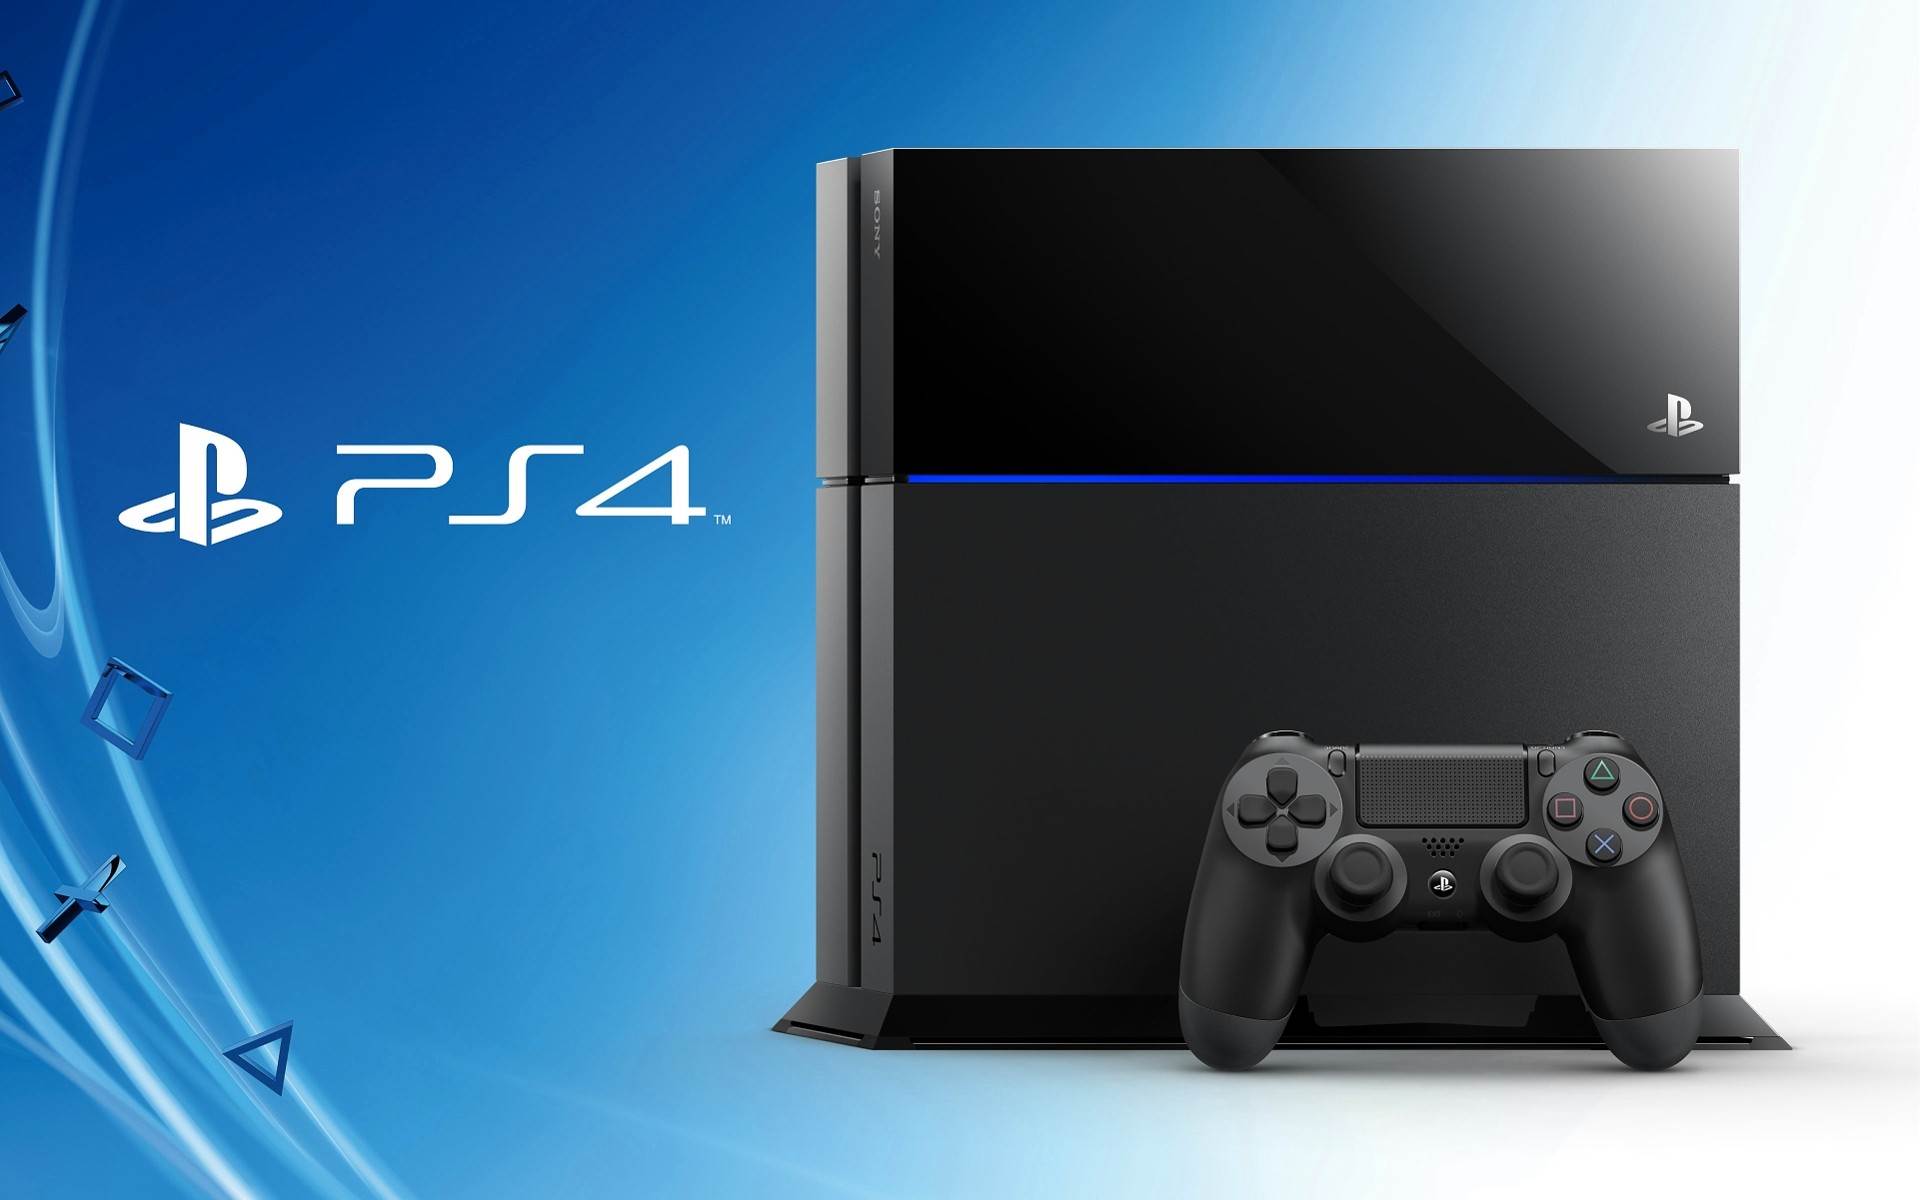 Sony Playstation 4 to release on November 15, 2013!